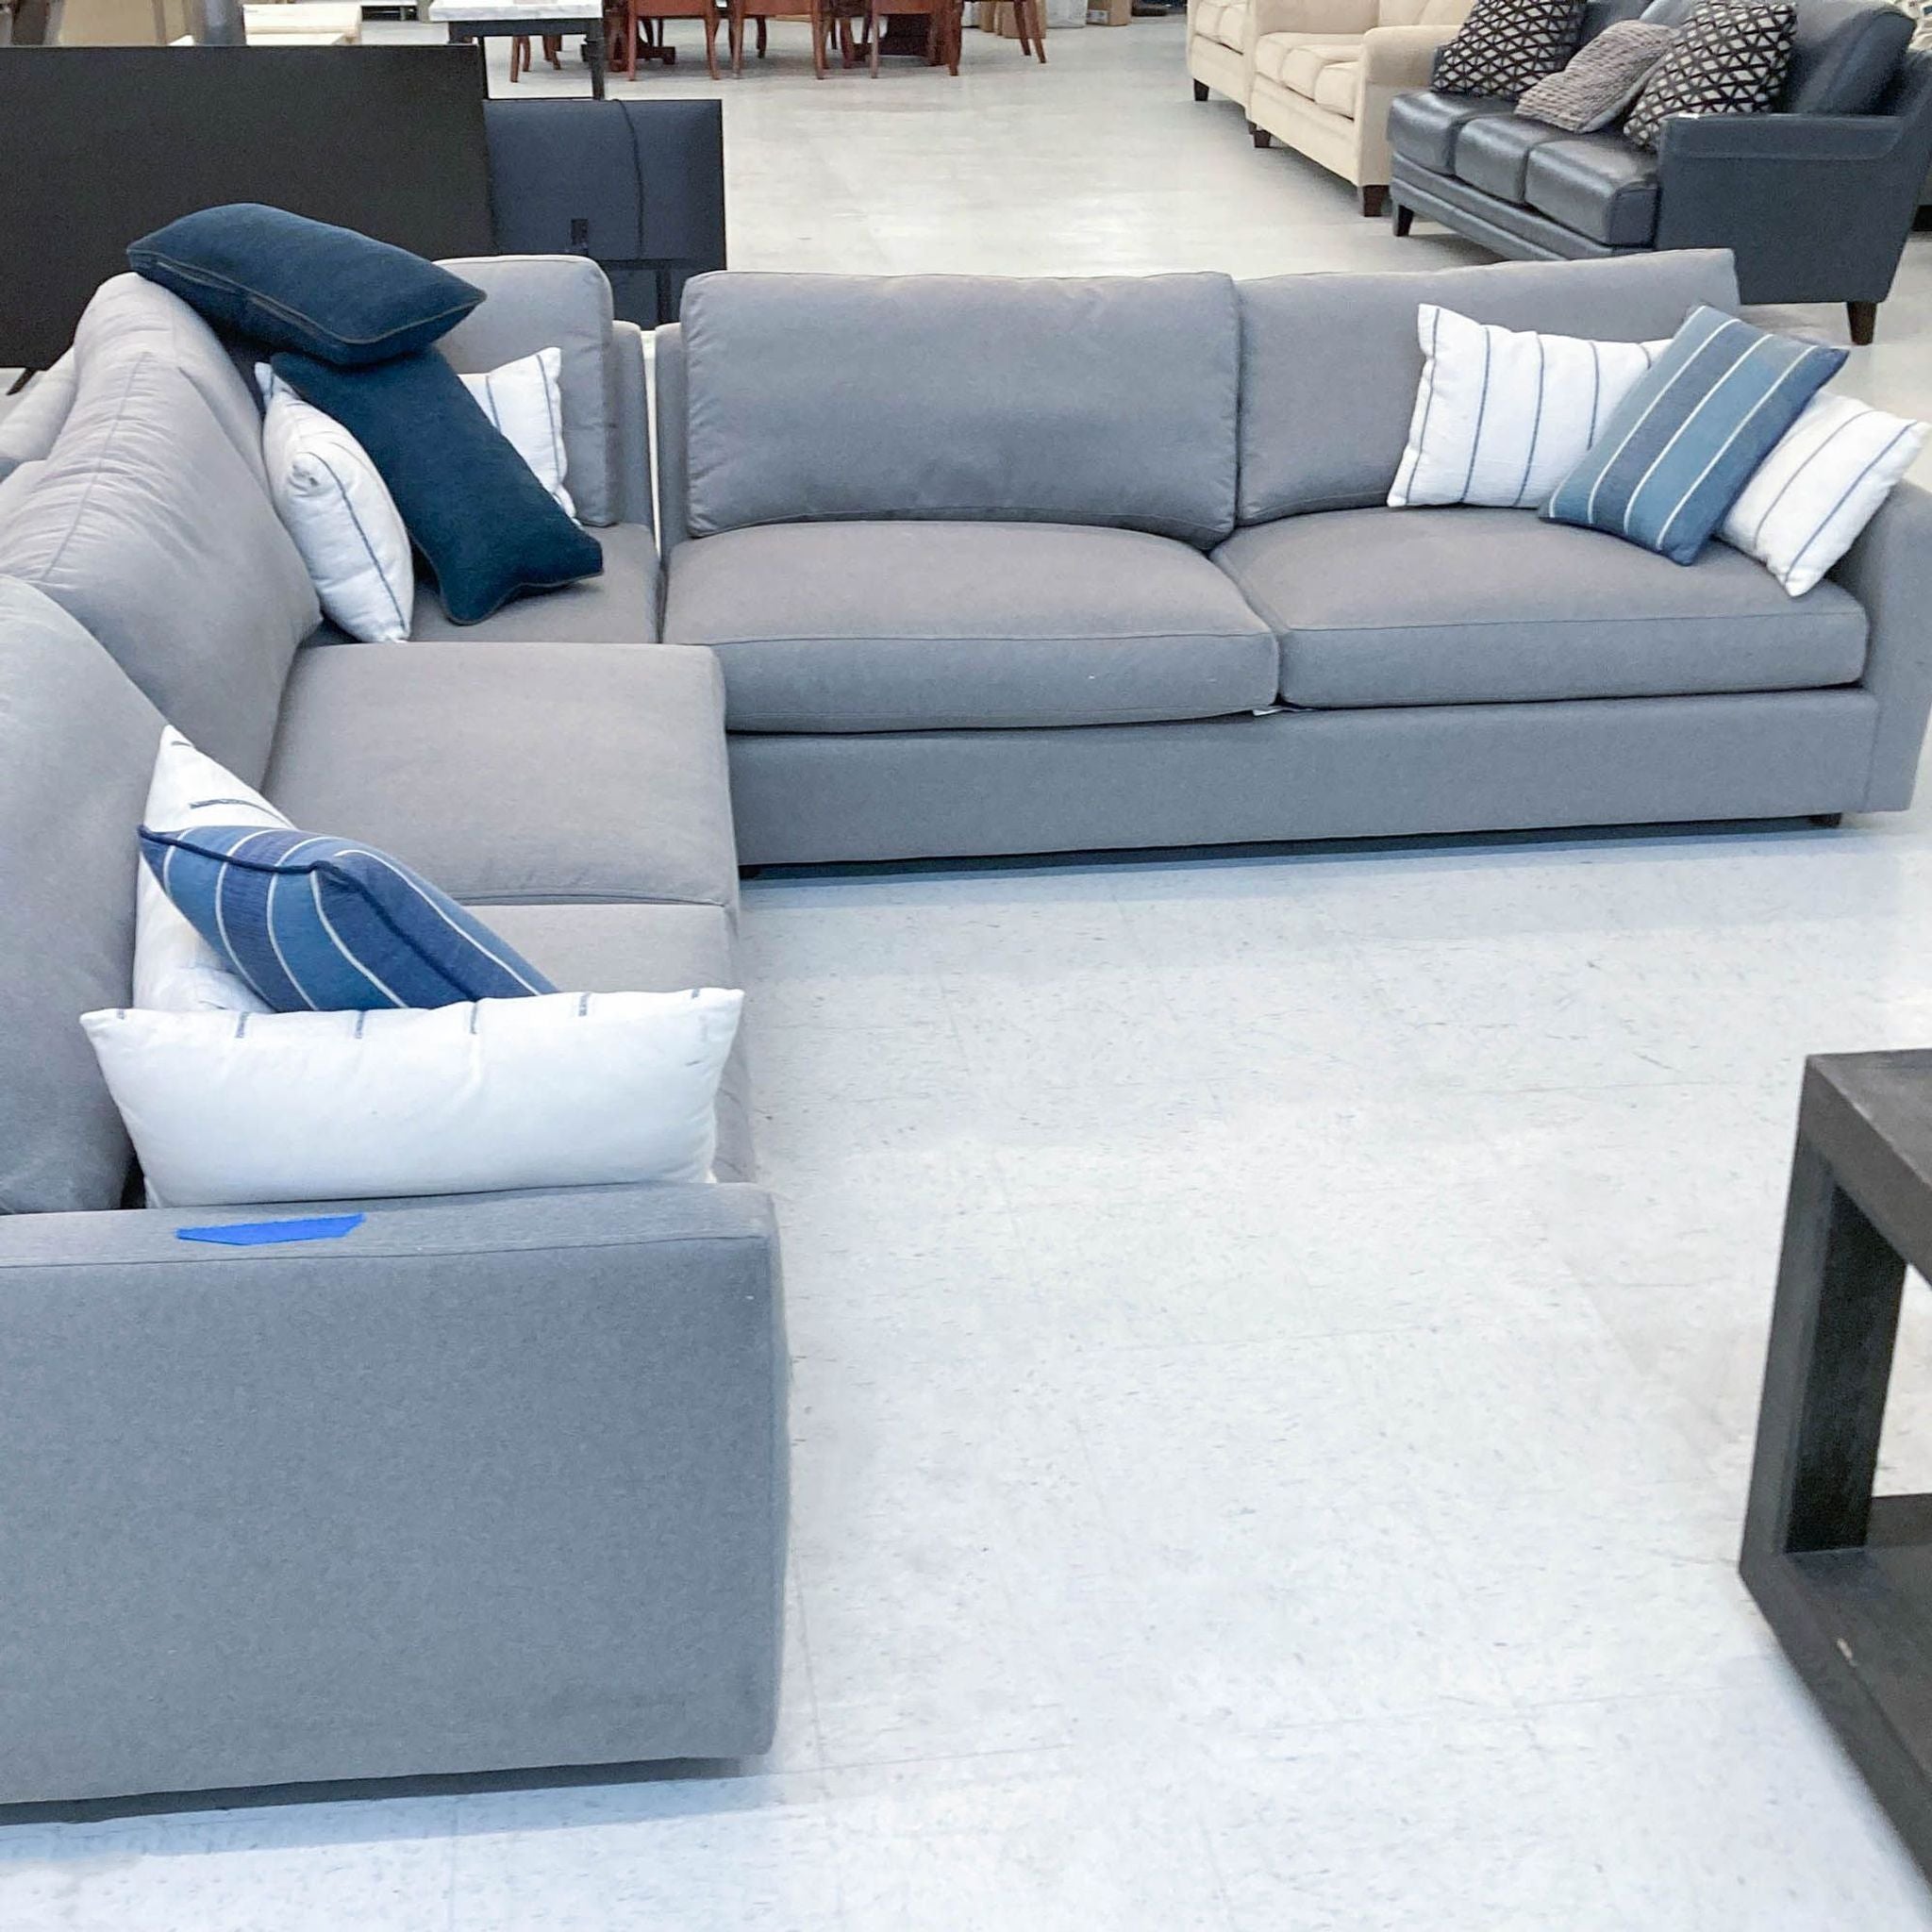 2. L-shaped gray sectional by Room & Board with white and blue accent pillows, displayed in a showroom.